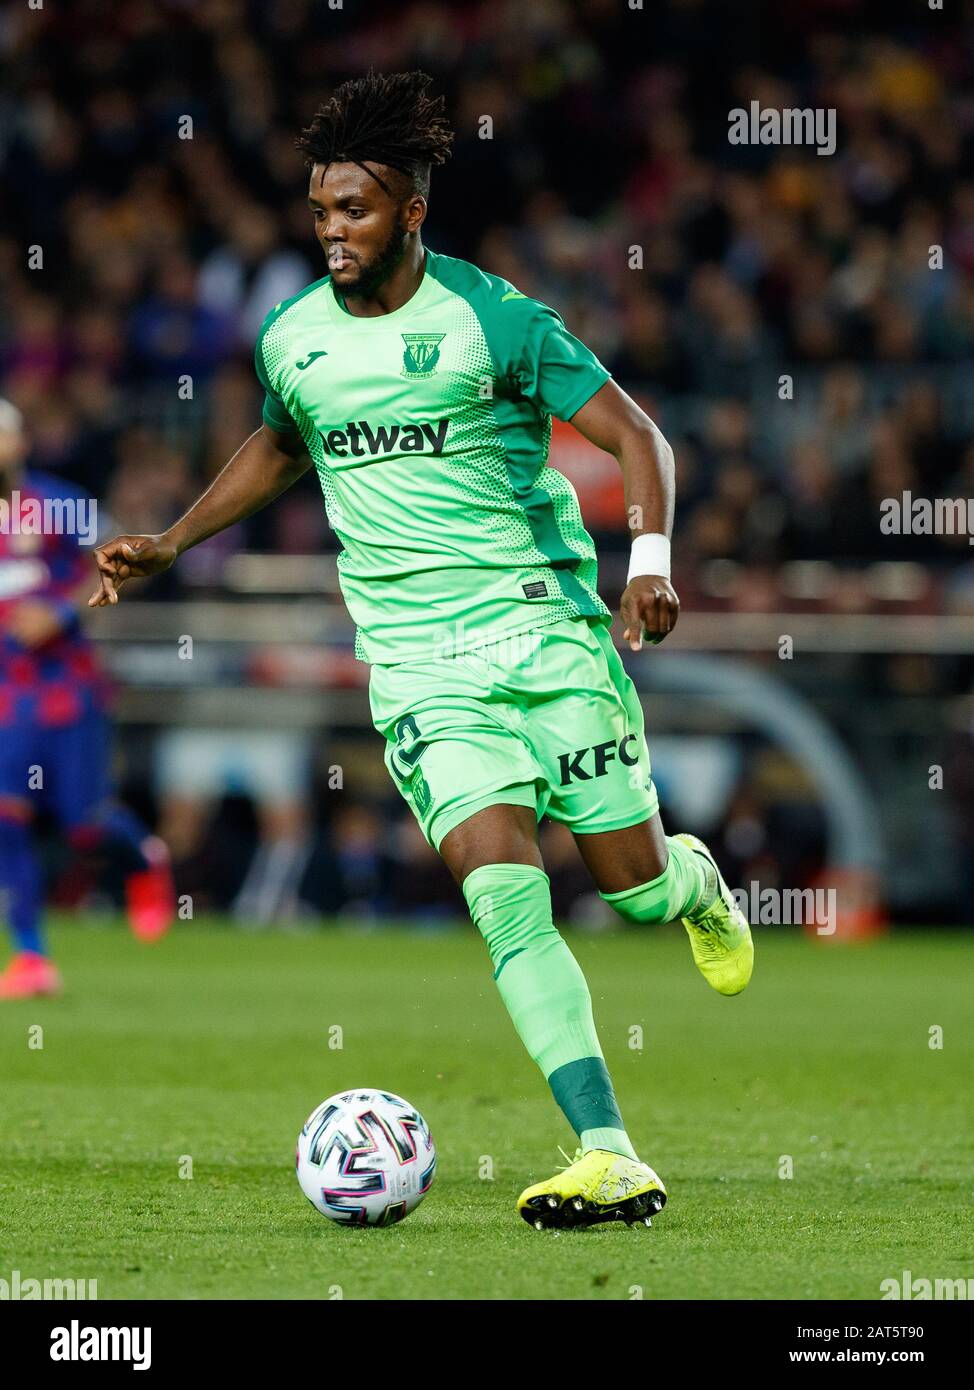 Barcelona, Spain. 30th Jan, 2020. BARCELONA, SPAIN - JANUARY 30: Chidozie Collins Awaziem of SD Leganes during the Spanish Copa del Rey Round of 16 match between FC Barcelona and SD Leganes at Camp Nou on January 30, 2020 in Barcelona, Spain. Credit: Dax Images/Alamy Live News Stock Photo